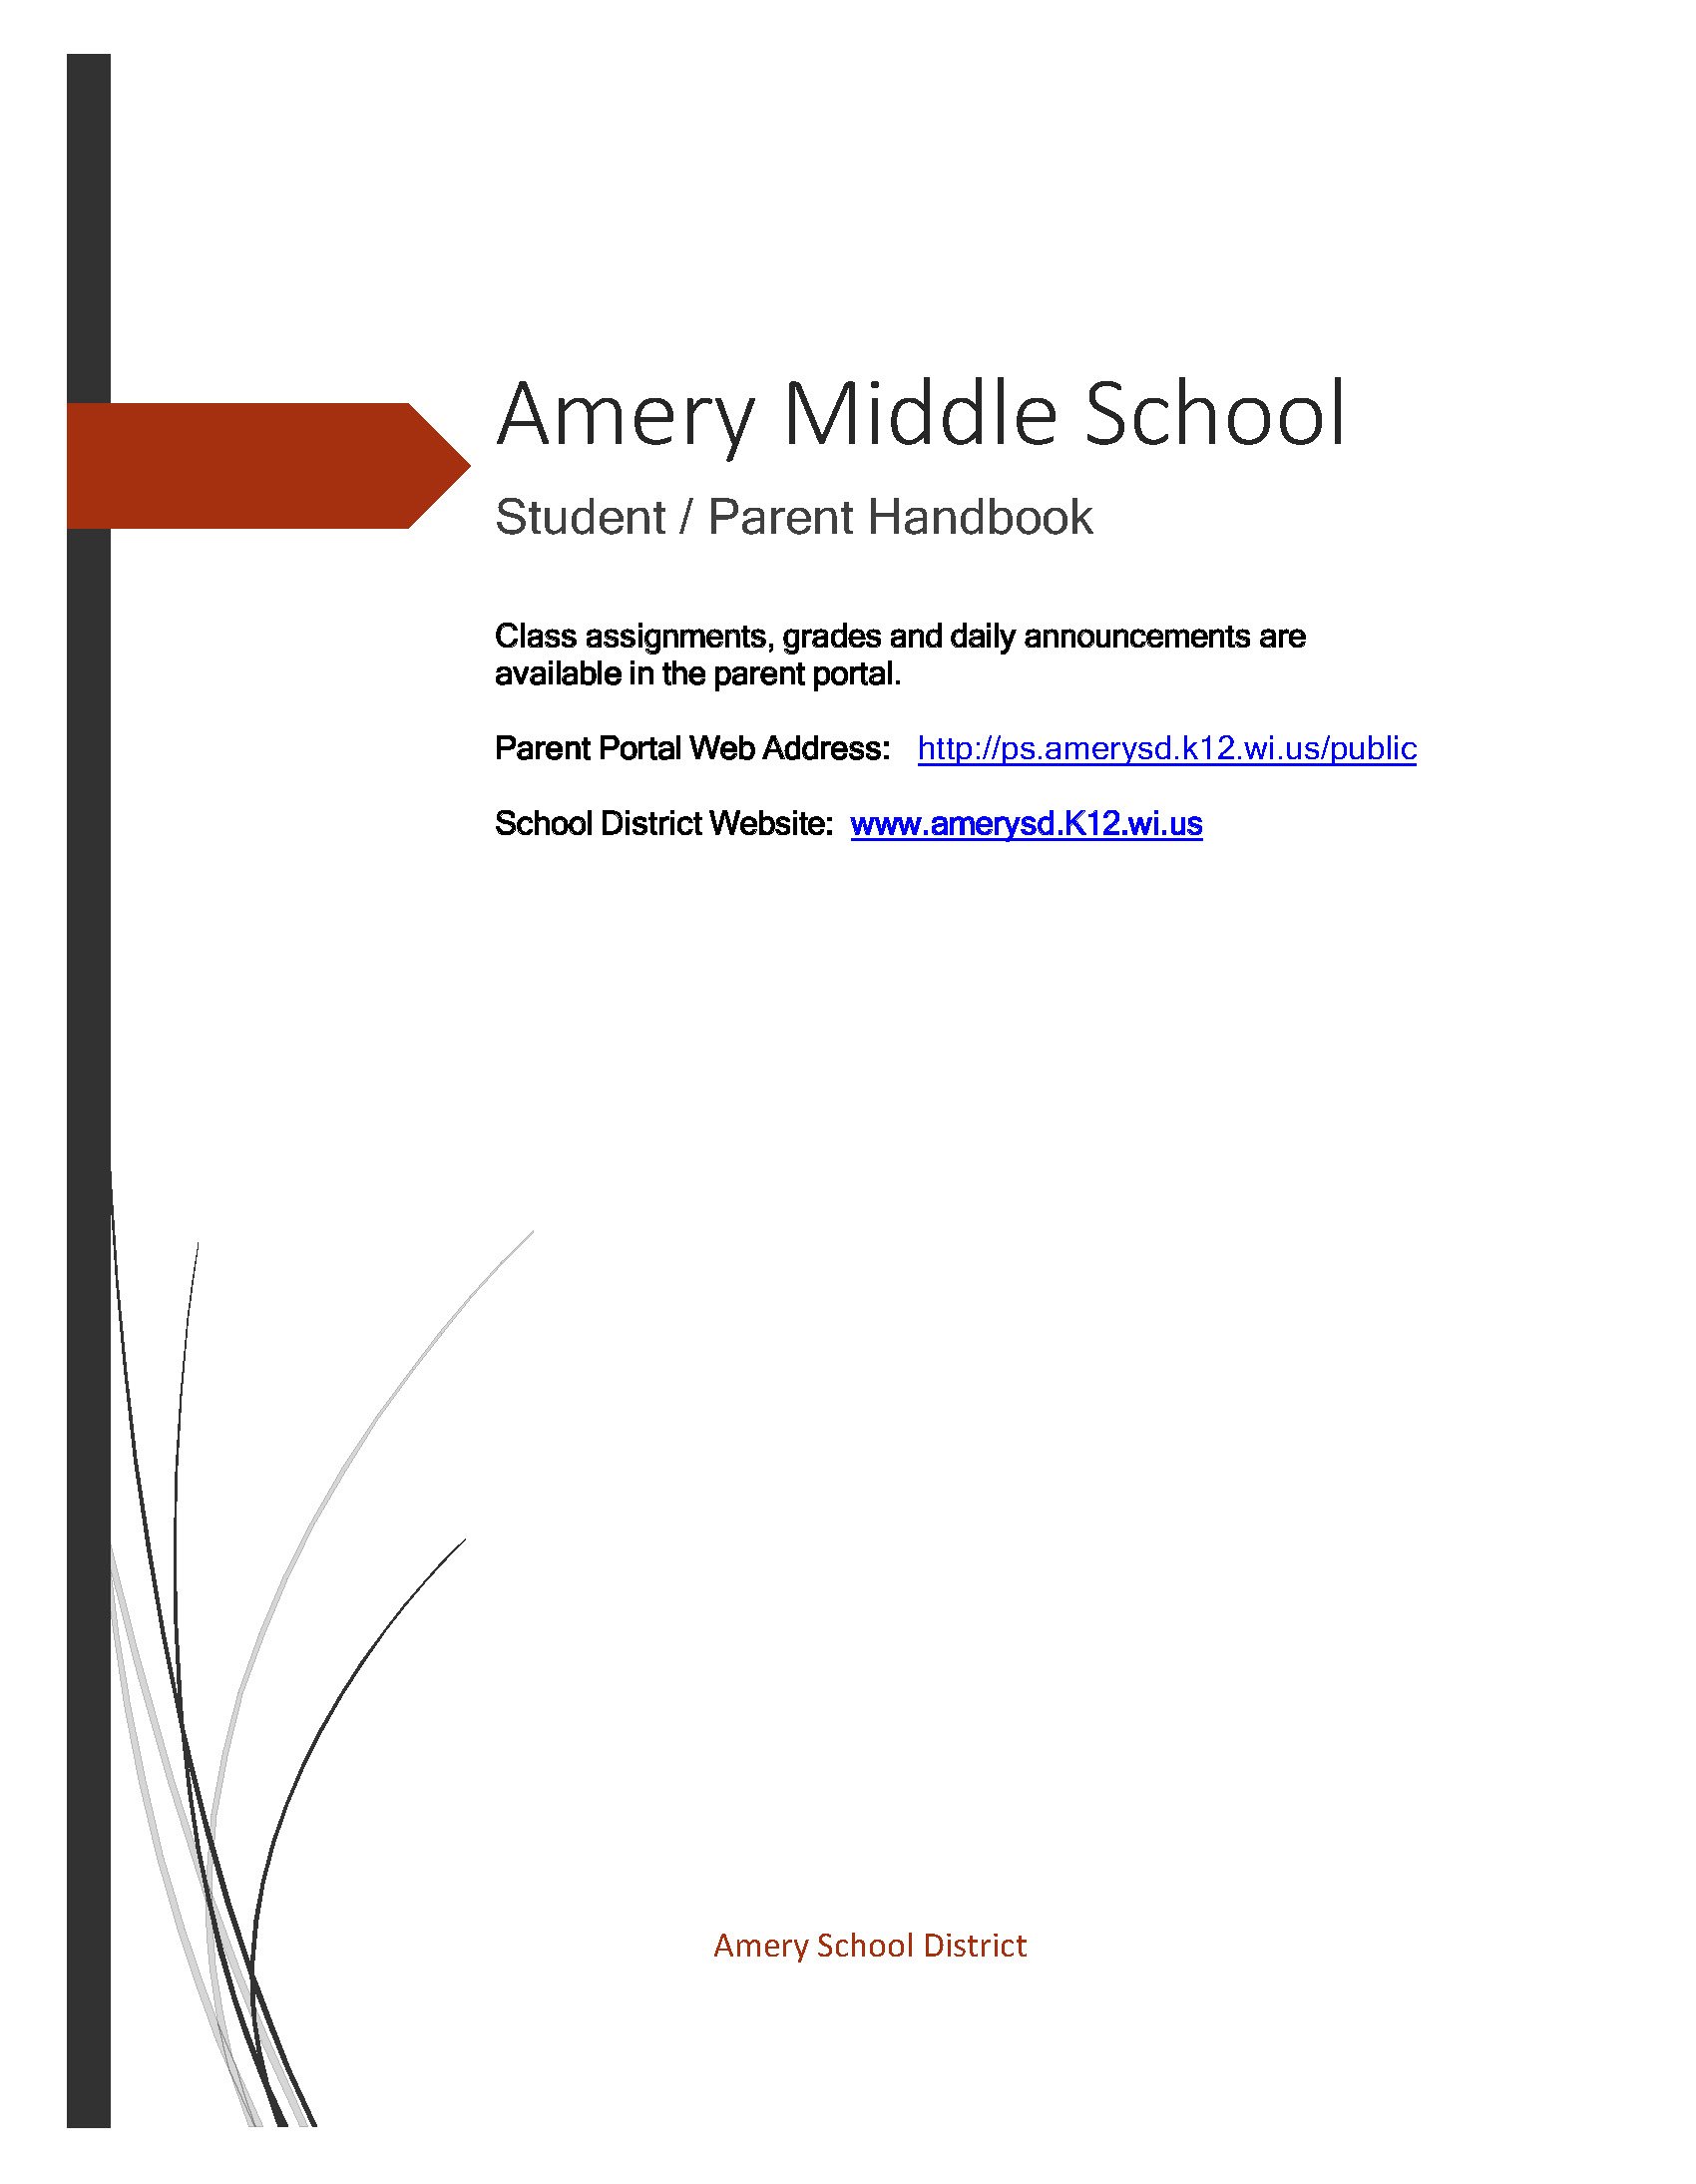 Cover image of Middle School Student Handbook.  Click here to view the entire handbook.